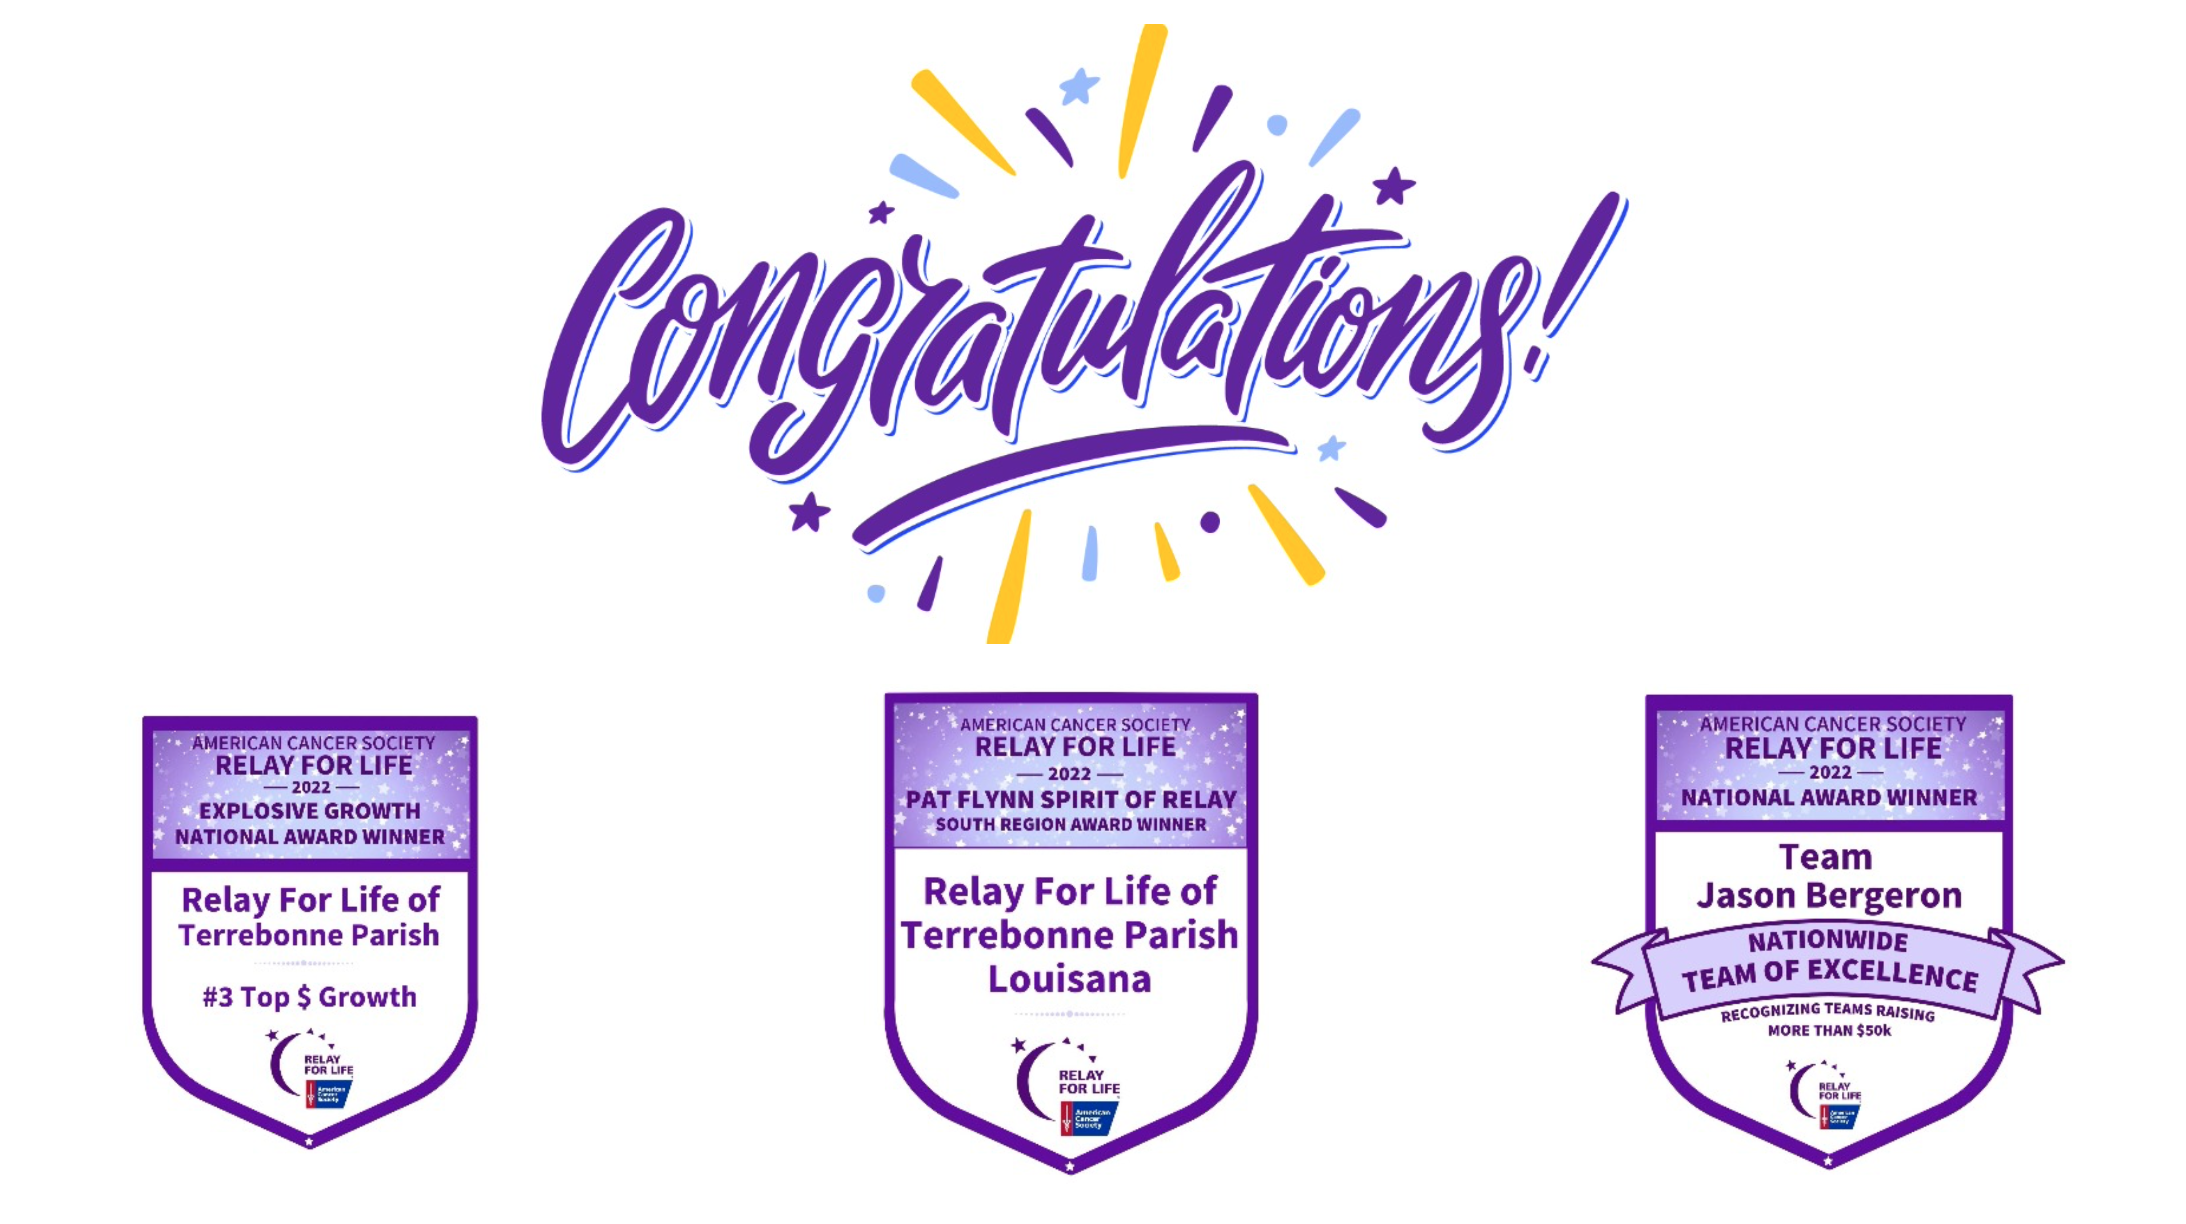 Relay for Life of Terrebonne Parish earns three national awards! The